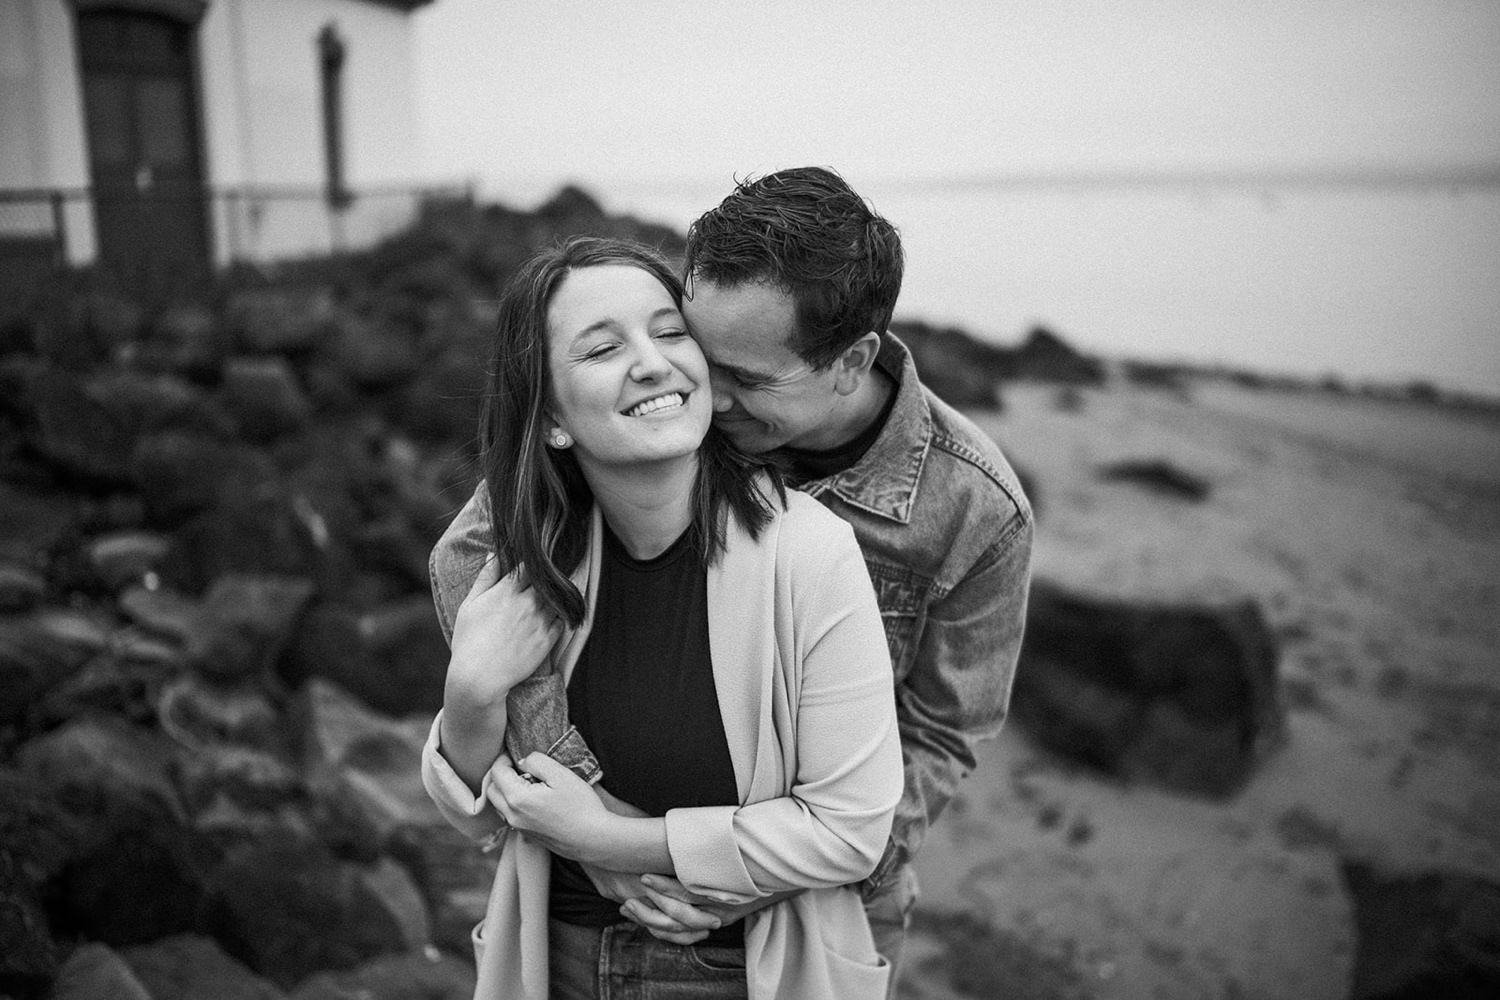 0219-176_Moody PNW engagement session at Discovery Park by top Washington photographer.JPG